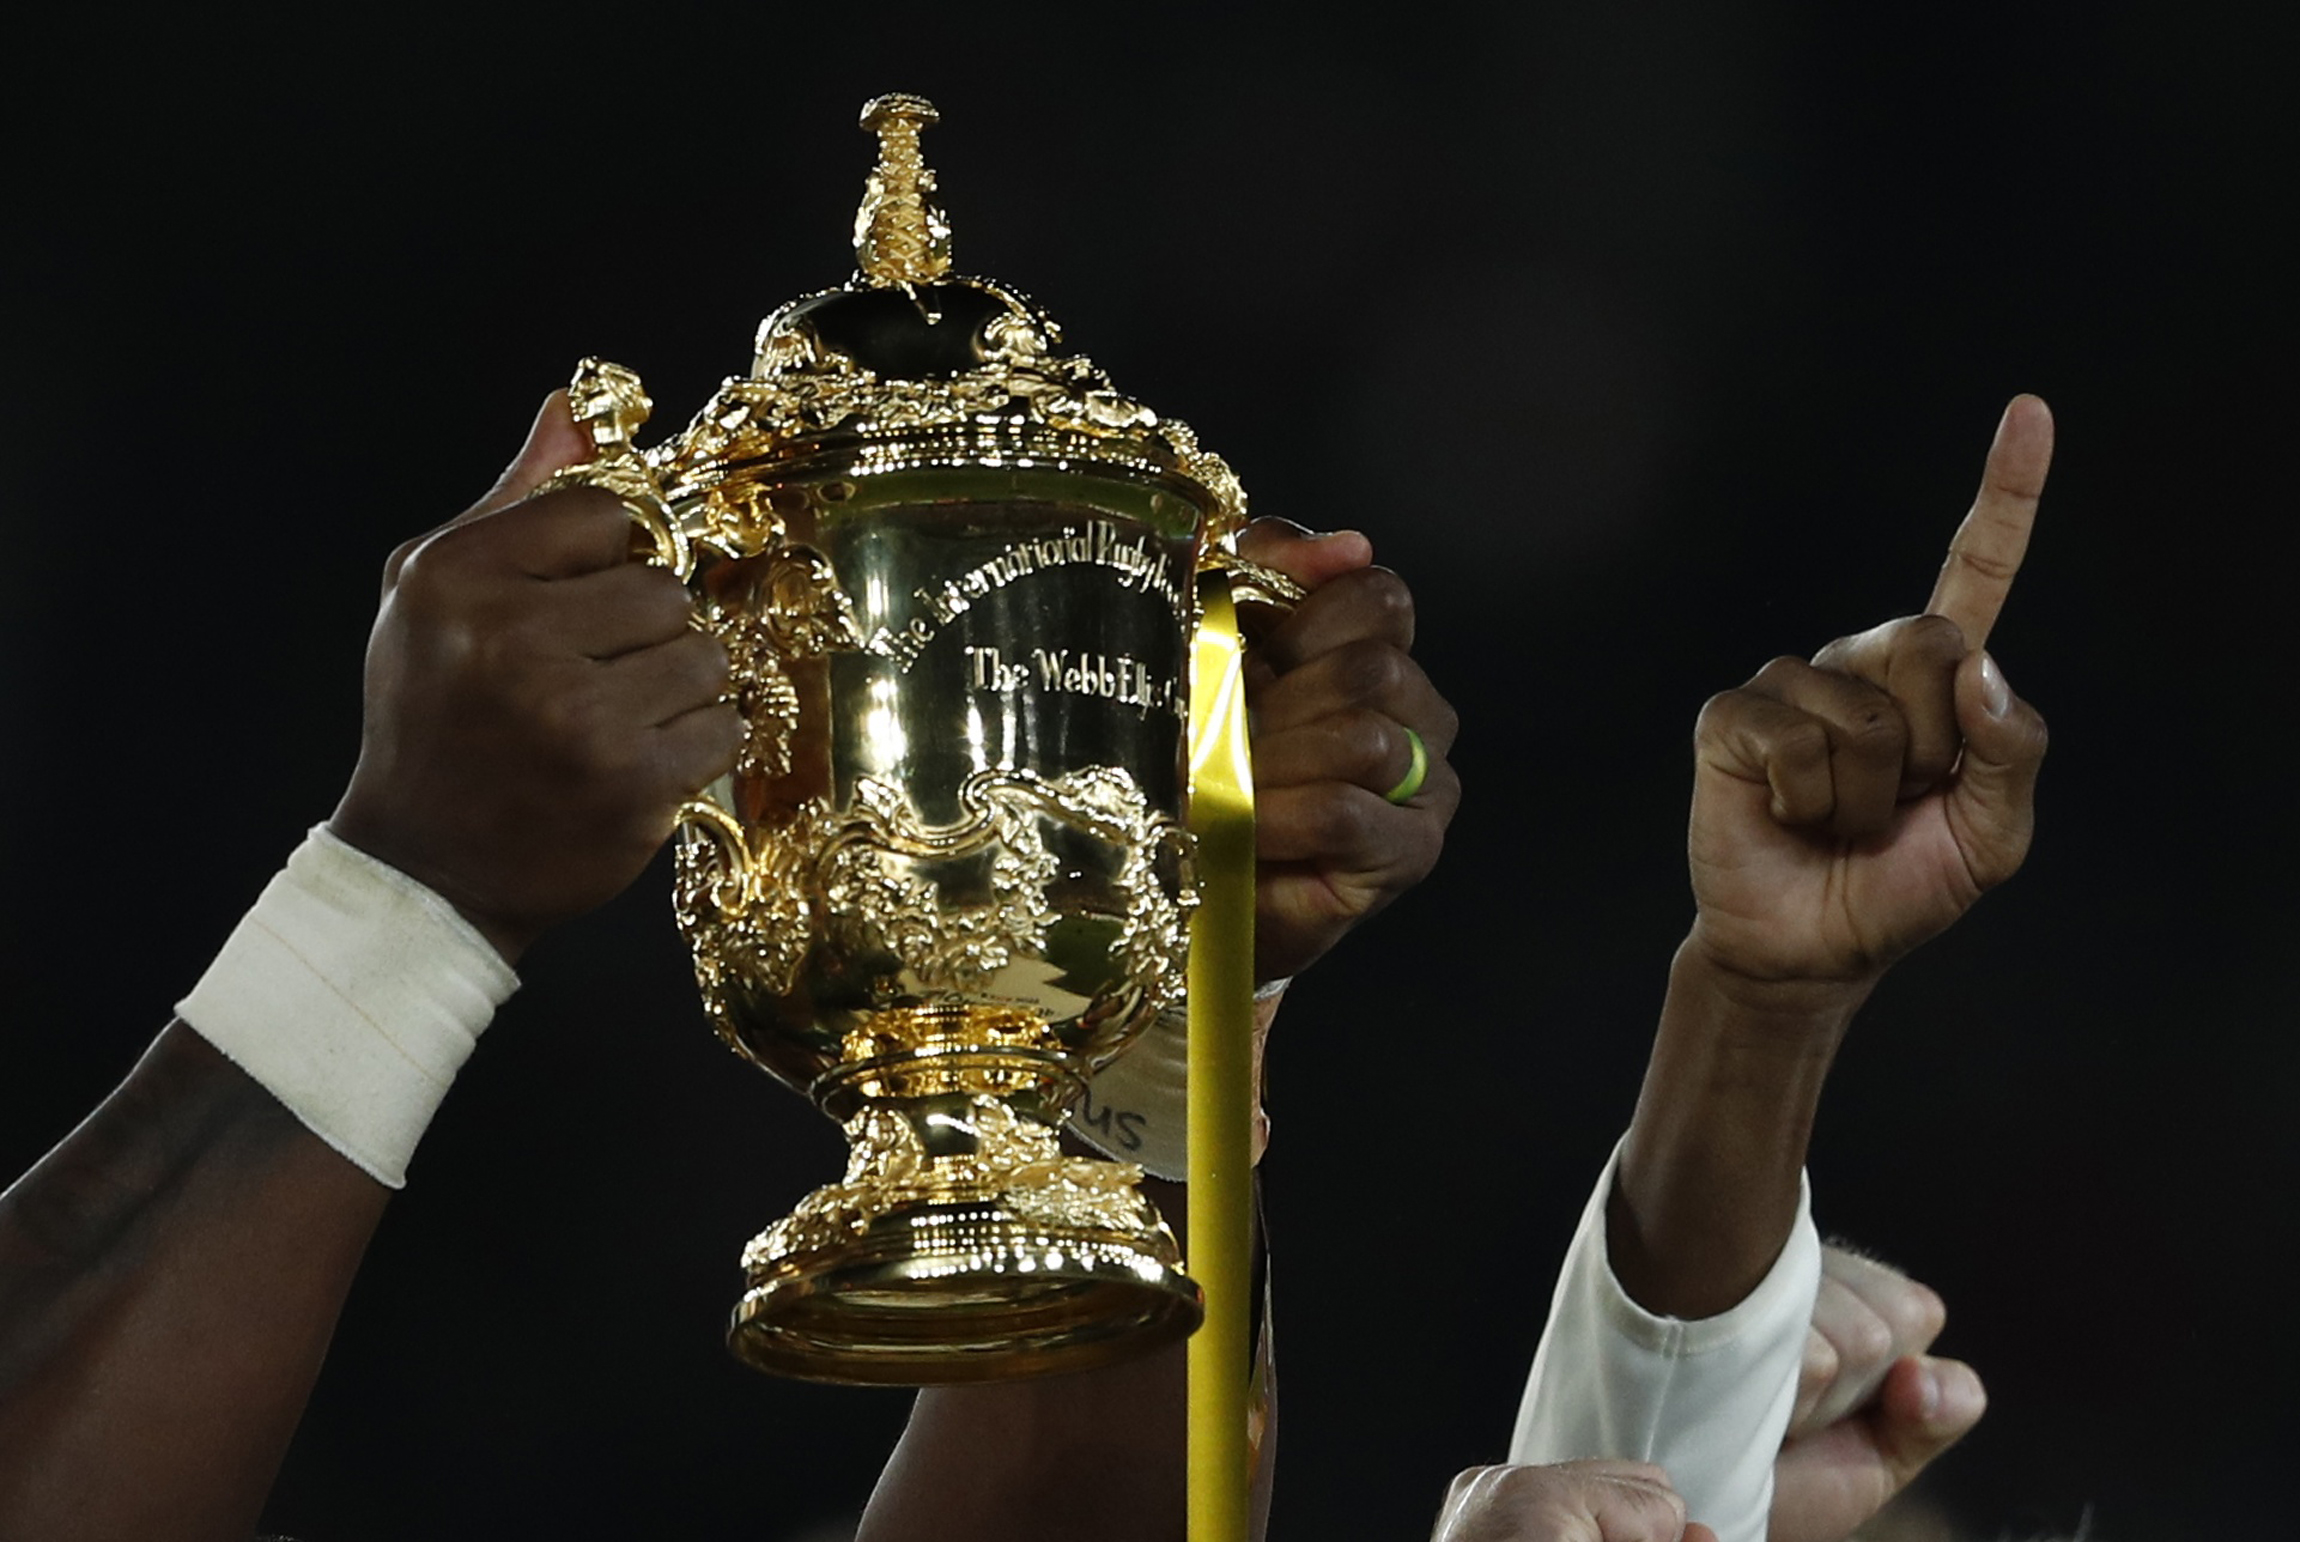 Rugby World Cup - Final - England v South Africa